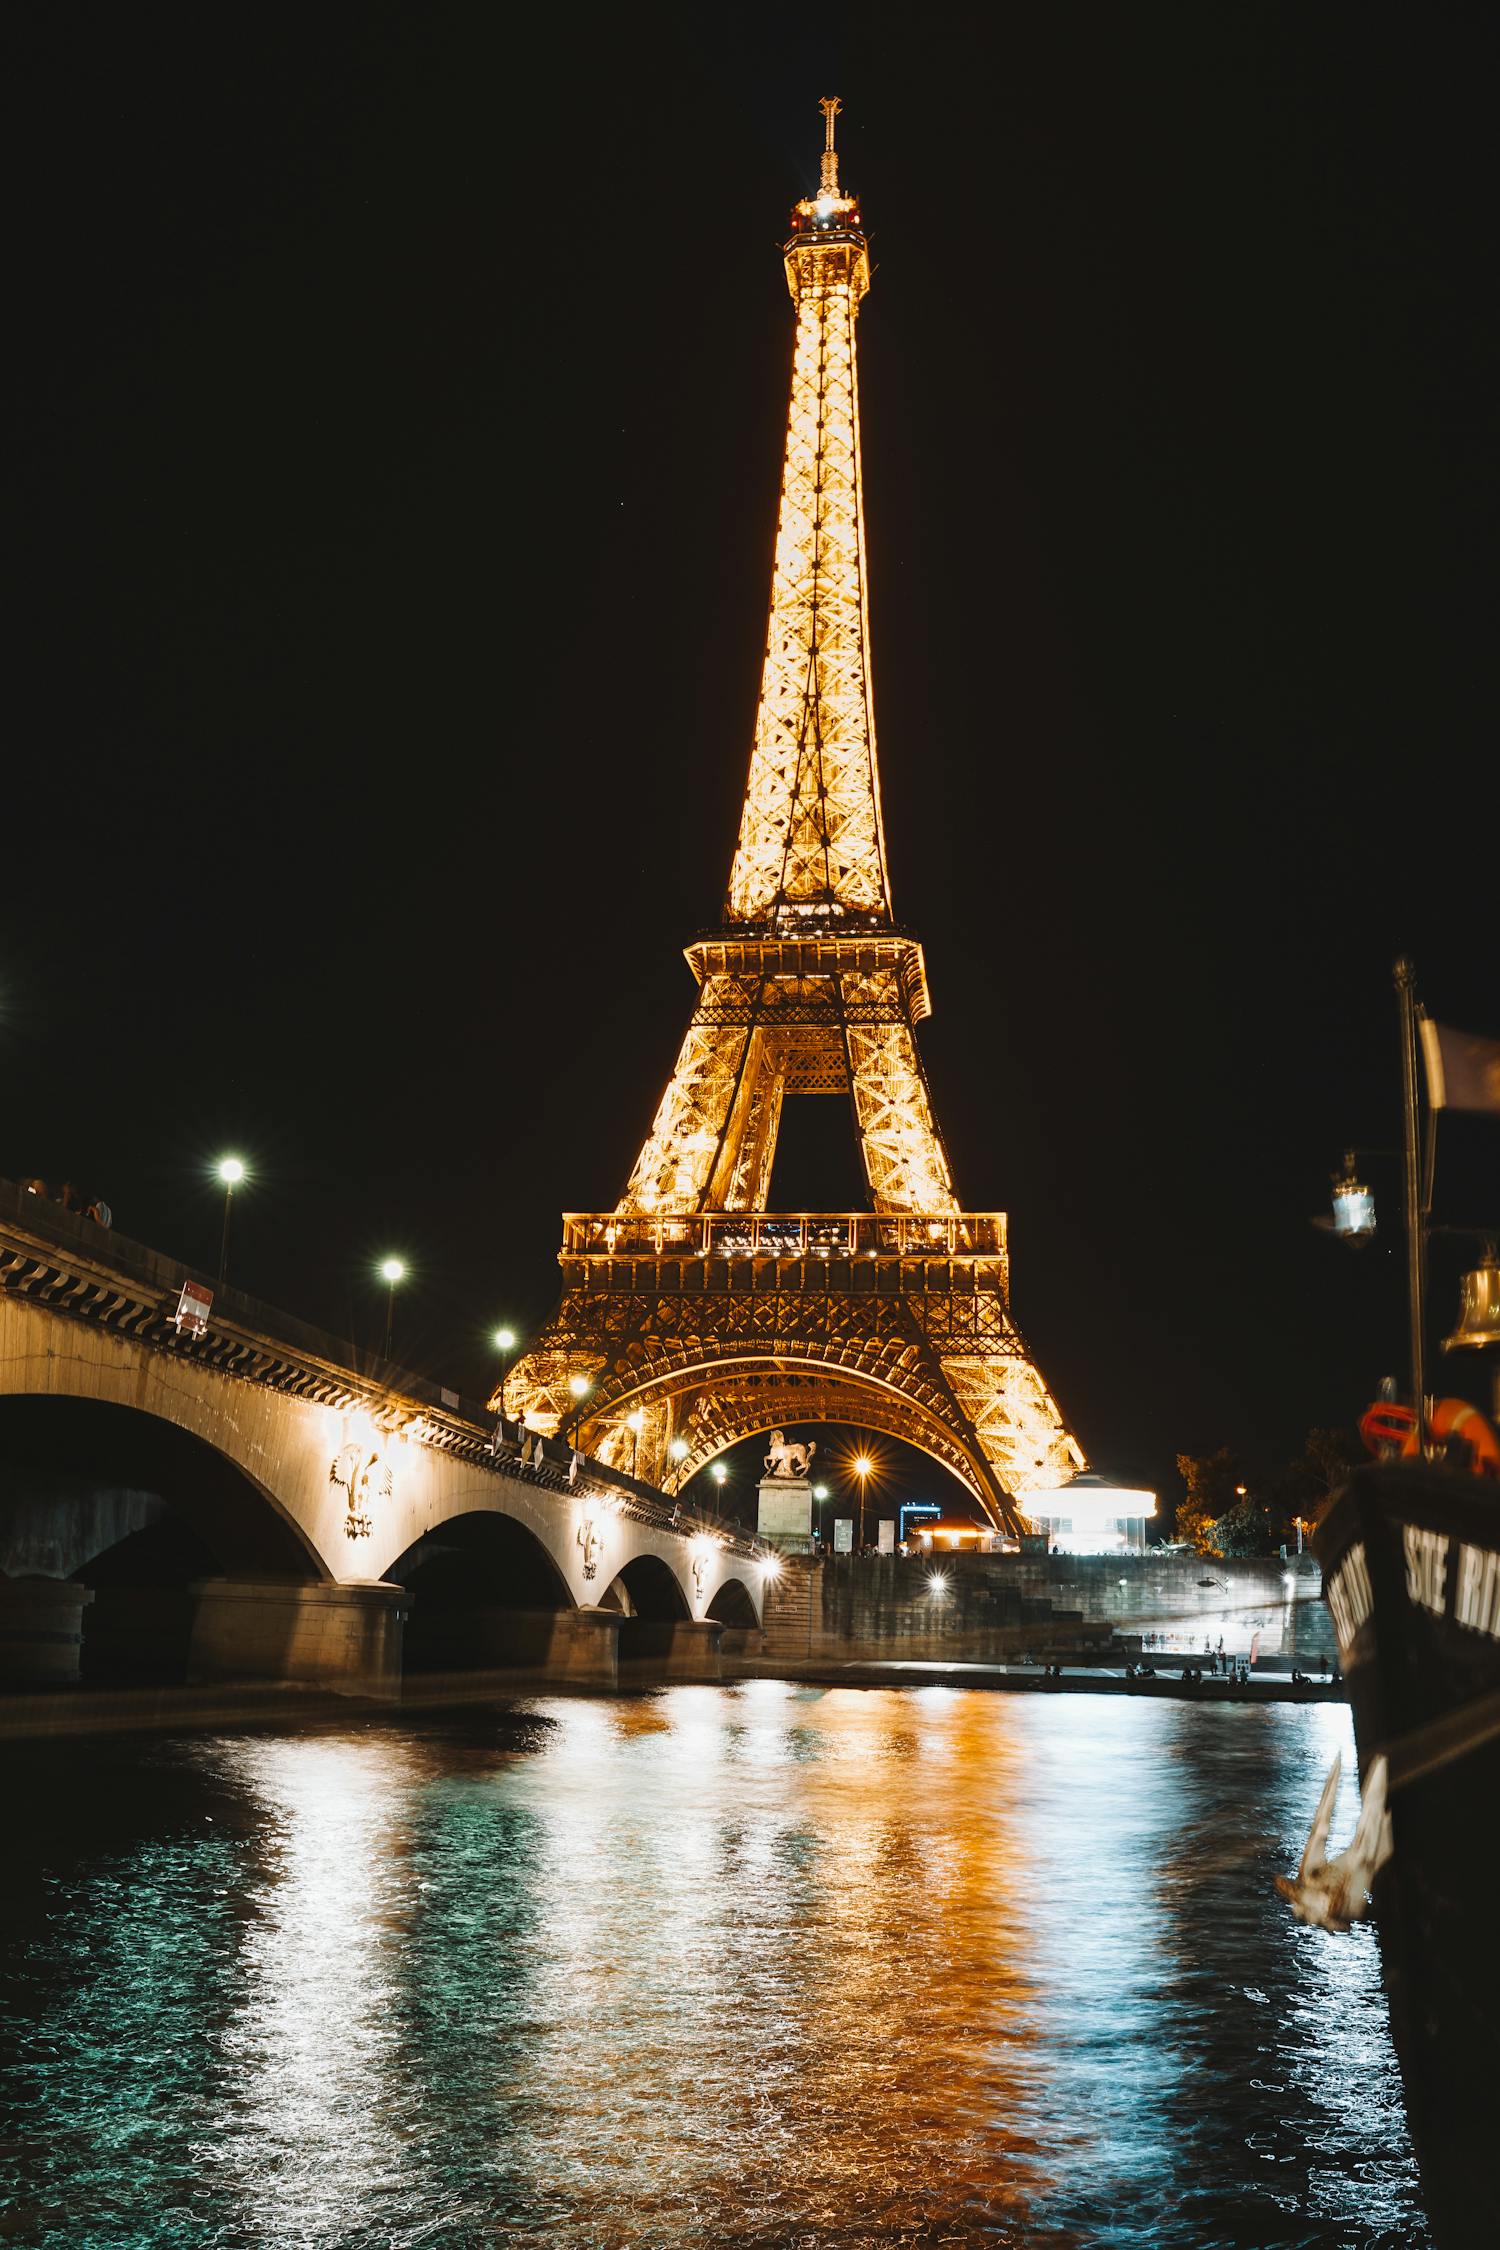 Low Angle Shot Of The Eiffel Tower With Illuminated Light At Night